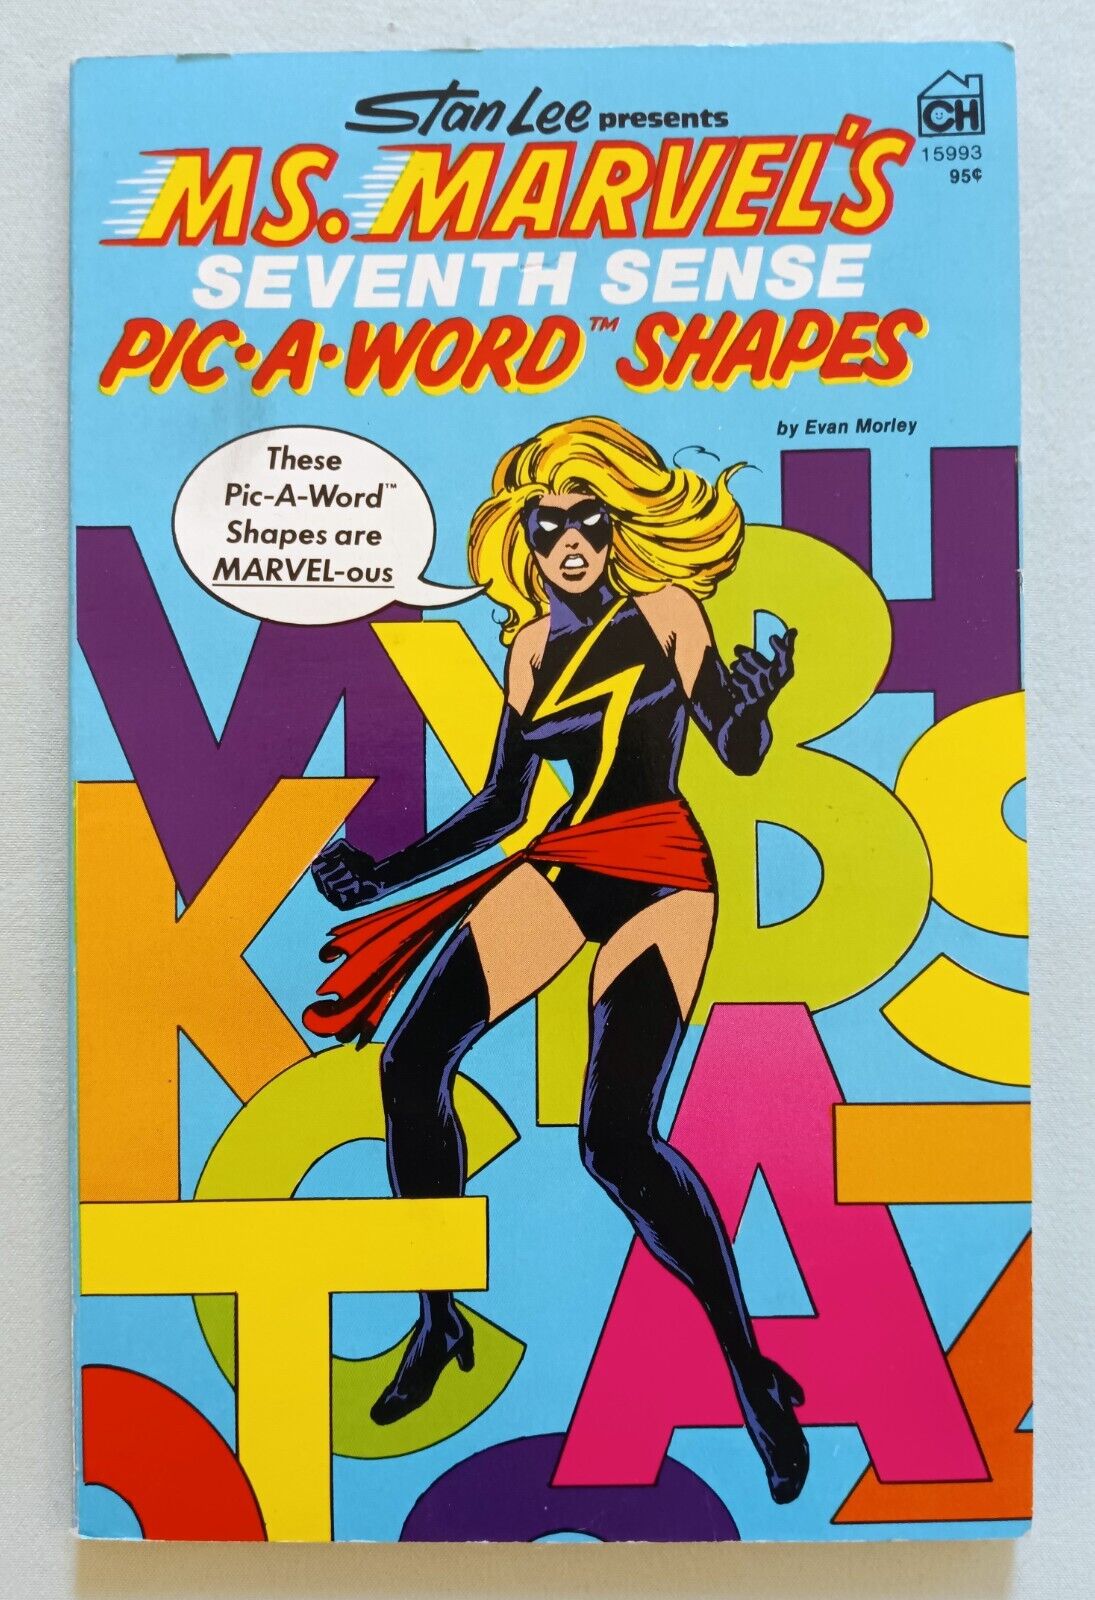 MS. MARVEL'S SEVENTH SENSE PIC-A-WORD SHAPES, STAN LEE CINNAMON HOUSE TEMPO 1978